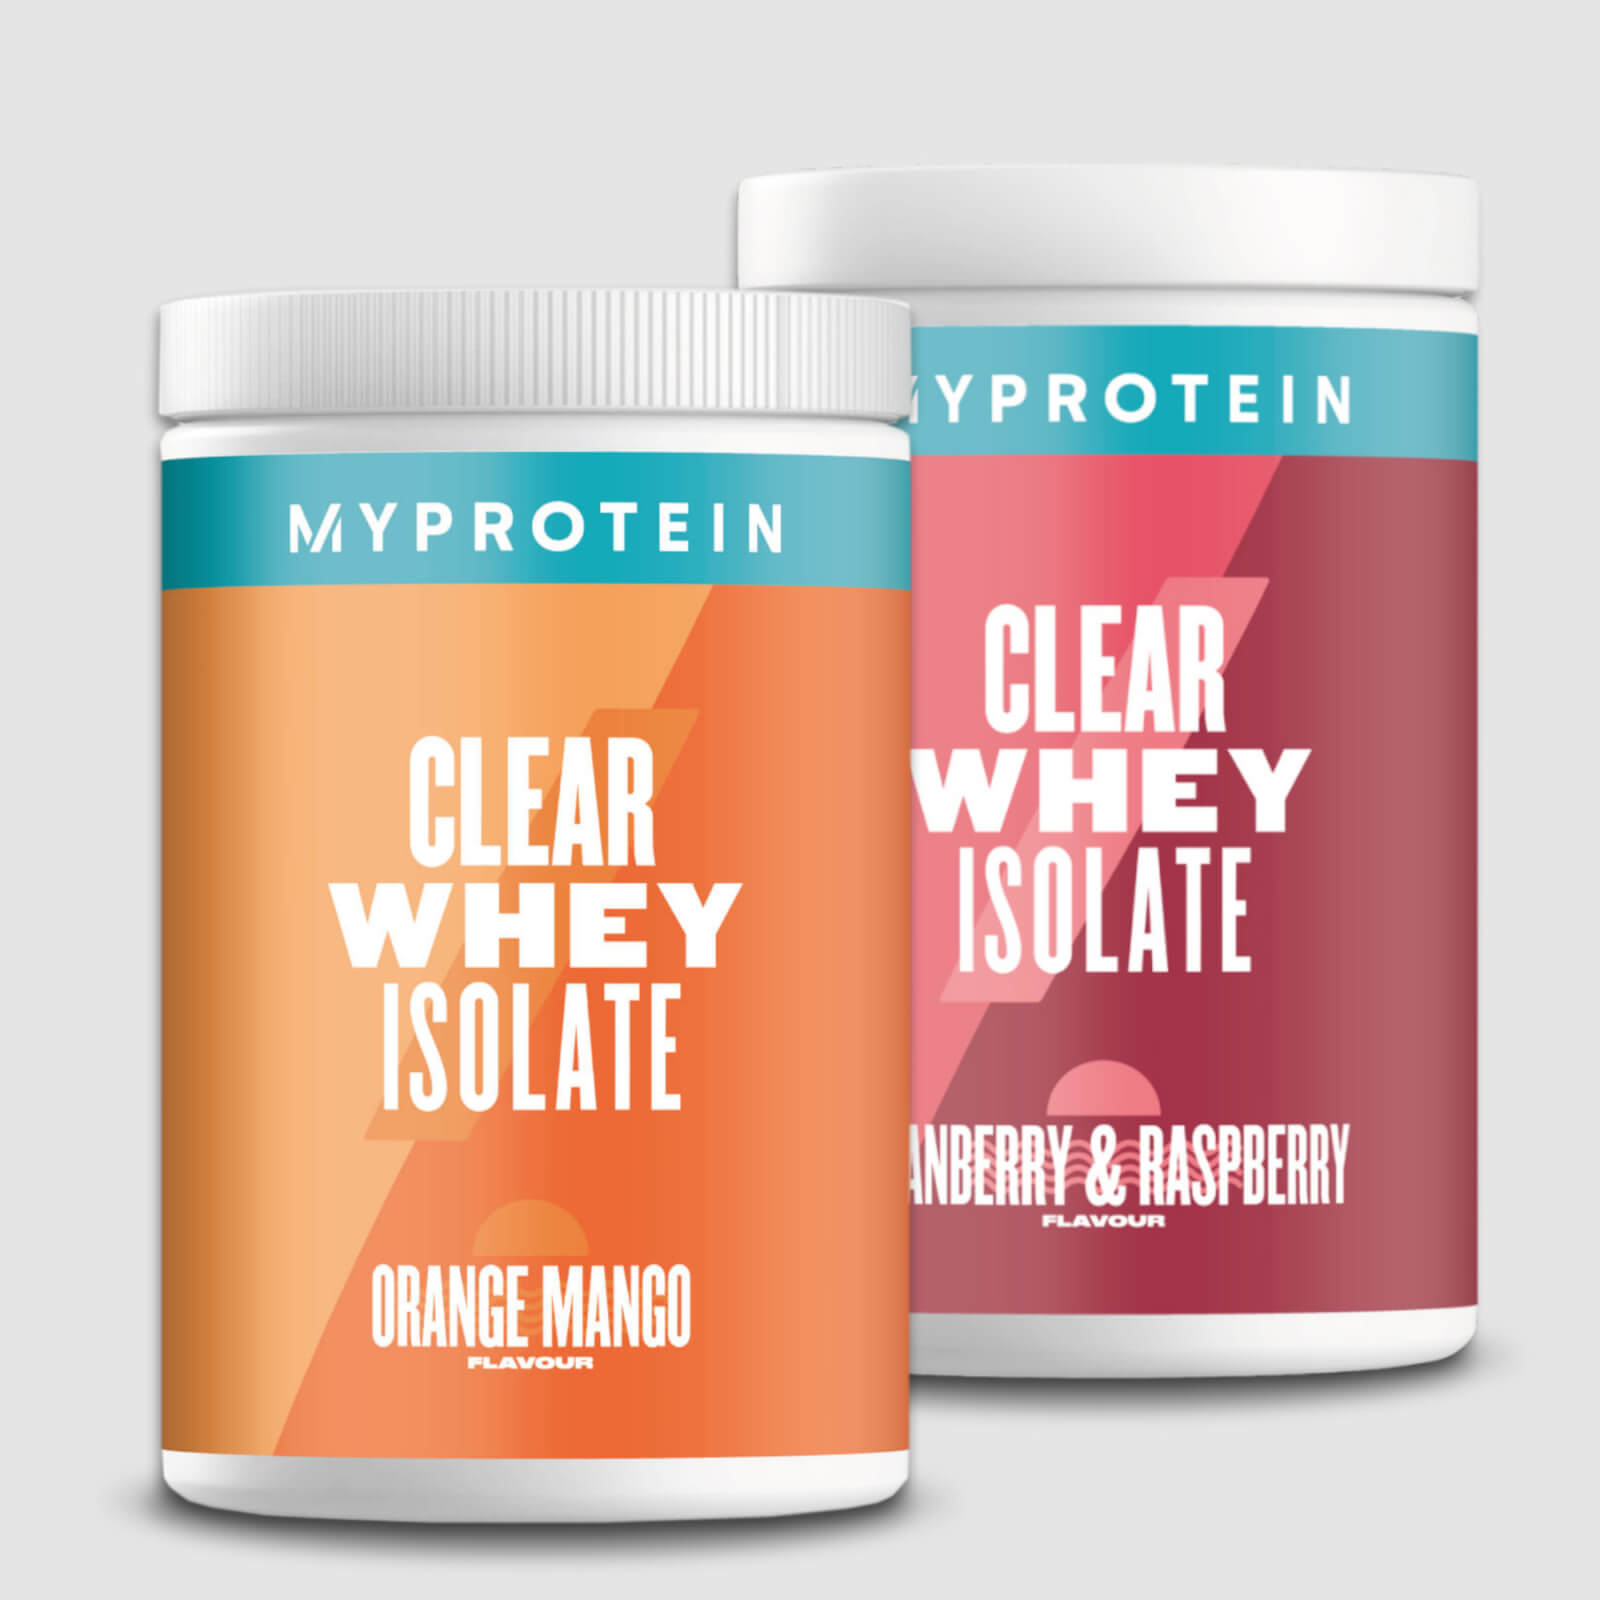 Myprotein Clear Whey Isolate Mix and Match Bundle (AU)